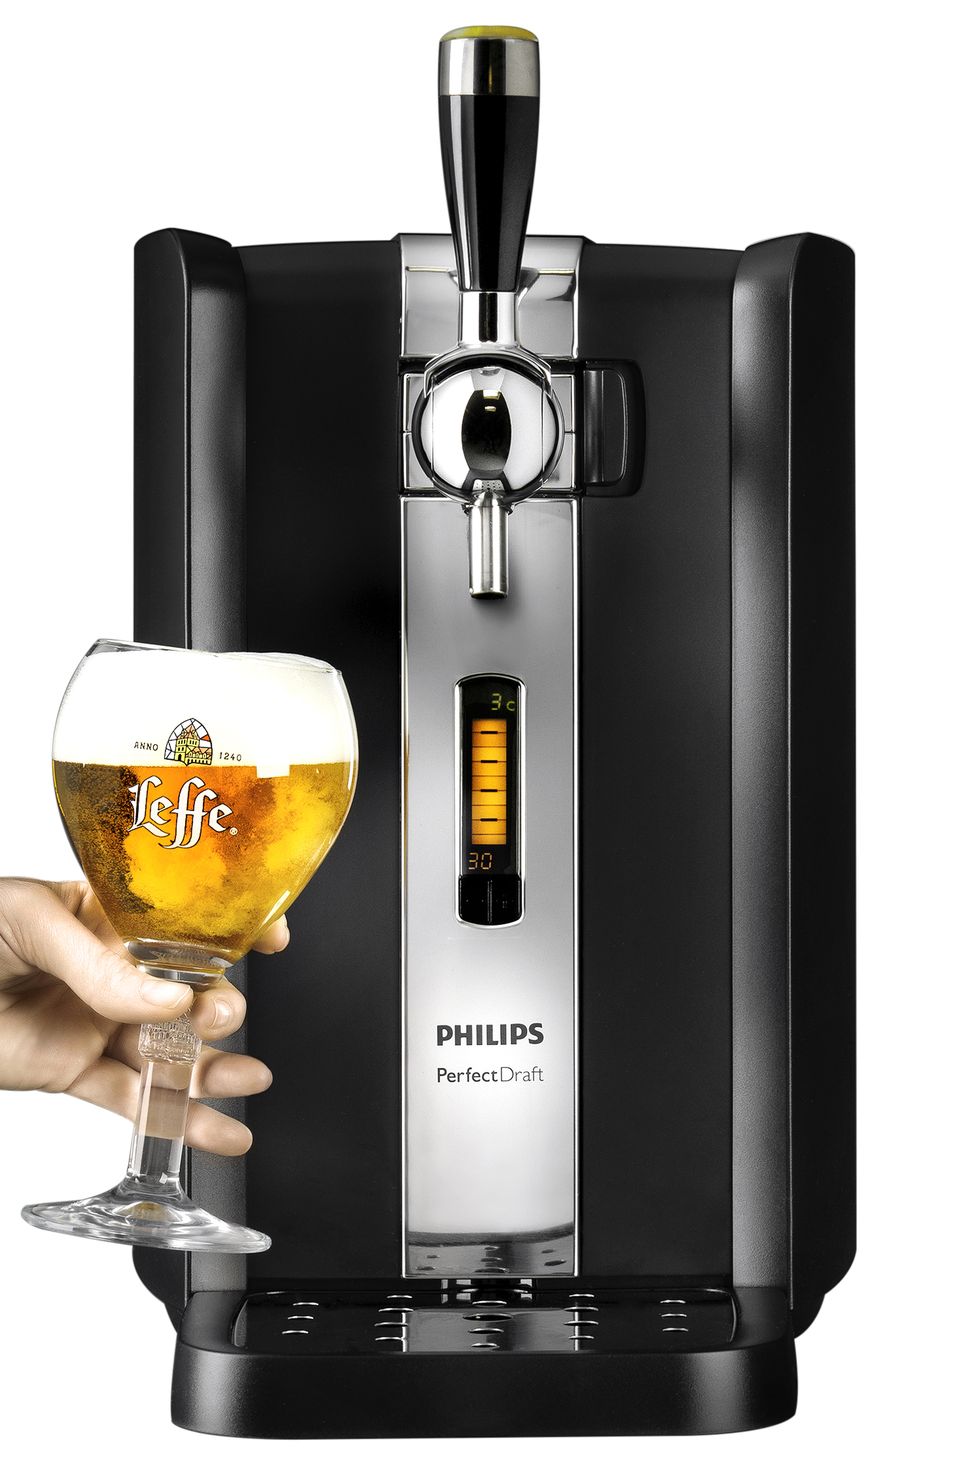 Aldi's selling the Philips perfect draft beer dispenser right now